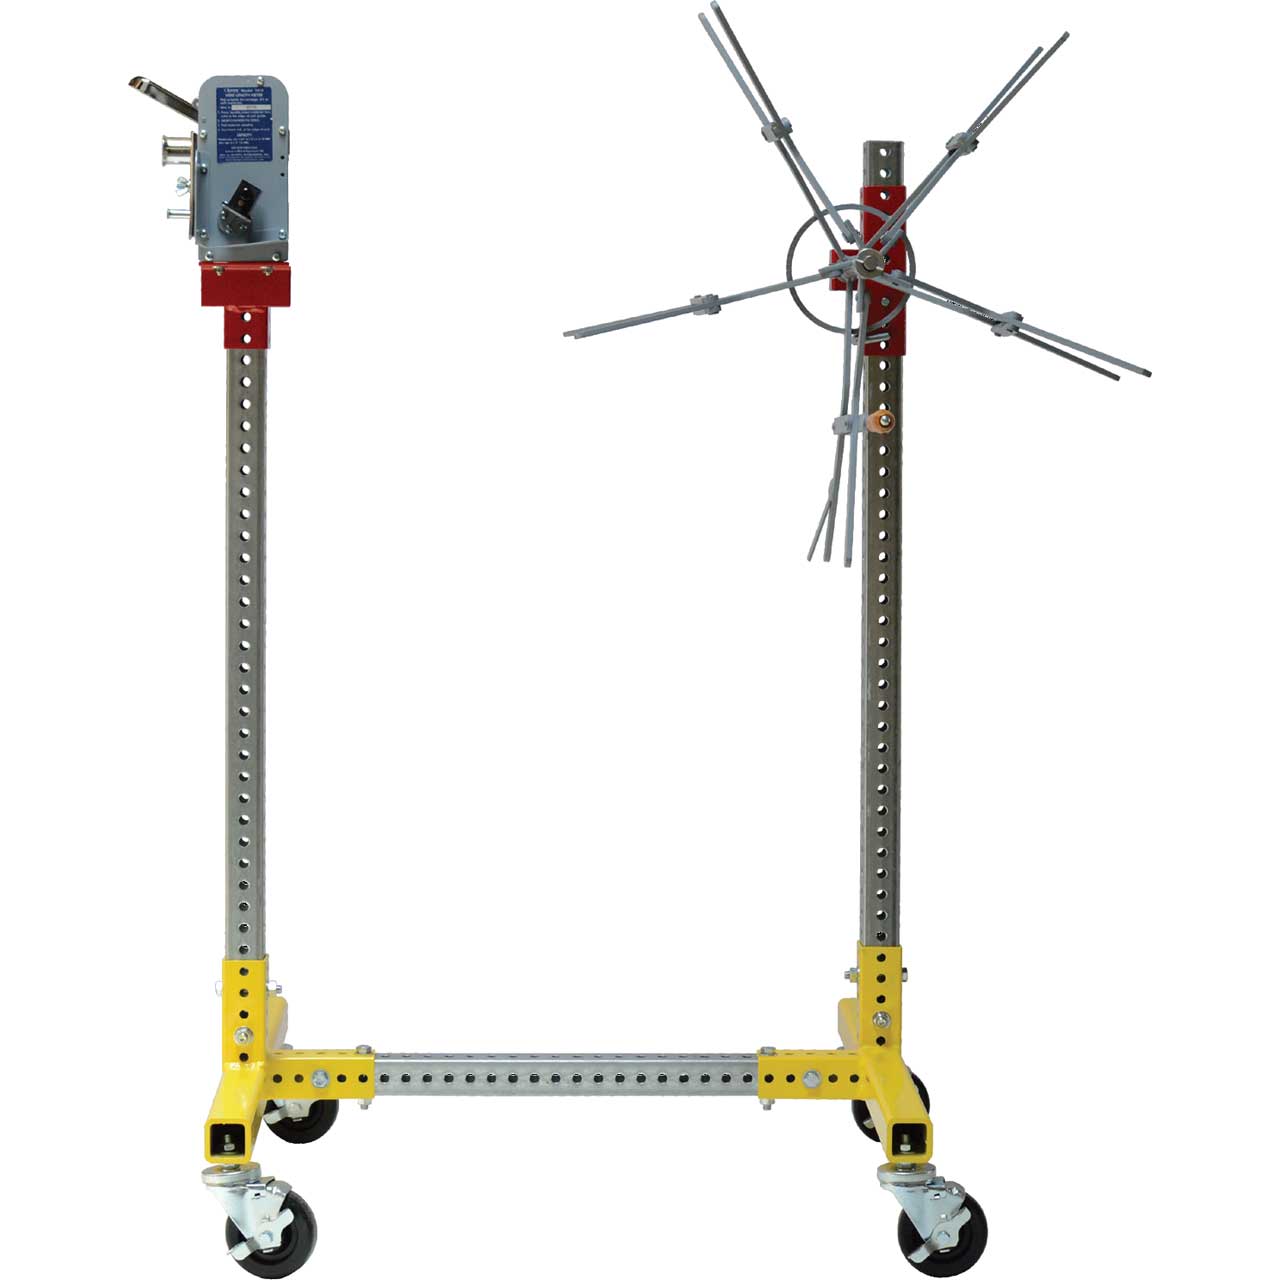 SpoolMaster SMP-WMC-16-NC Wire Measuring and Coiling System - No Counter - 15 Inch ID coiler SMP-WMC-16-NC